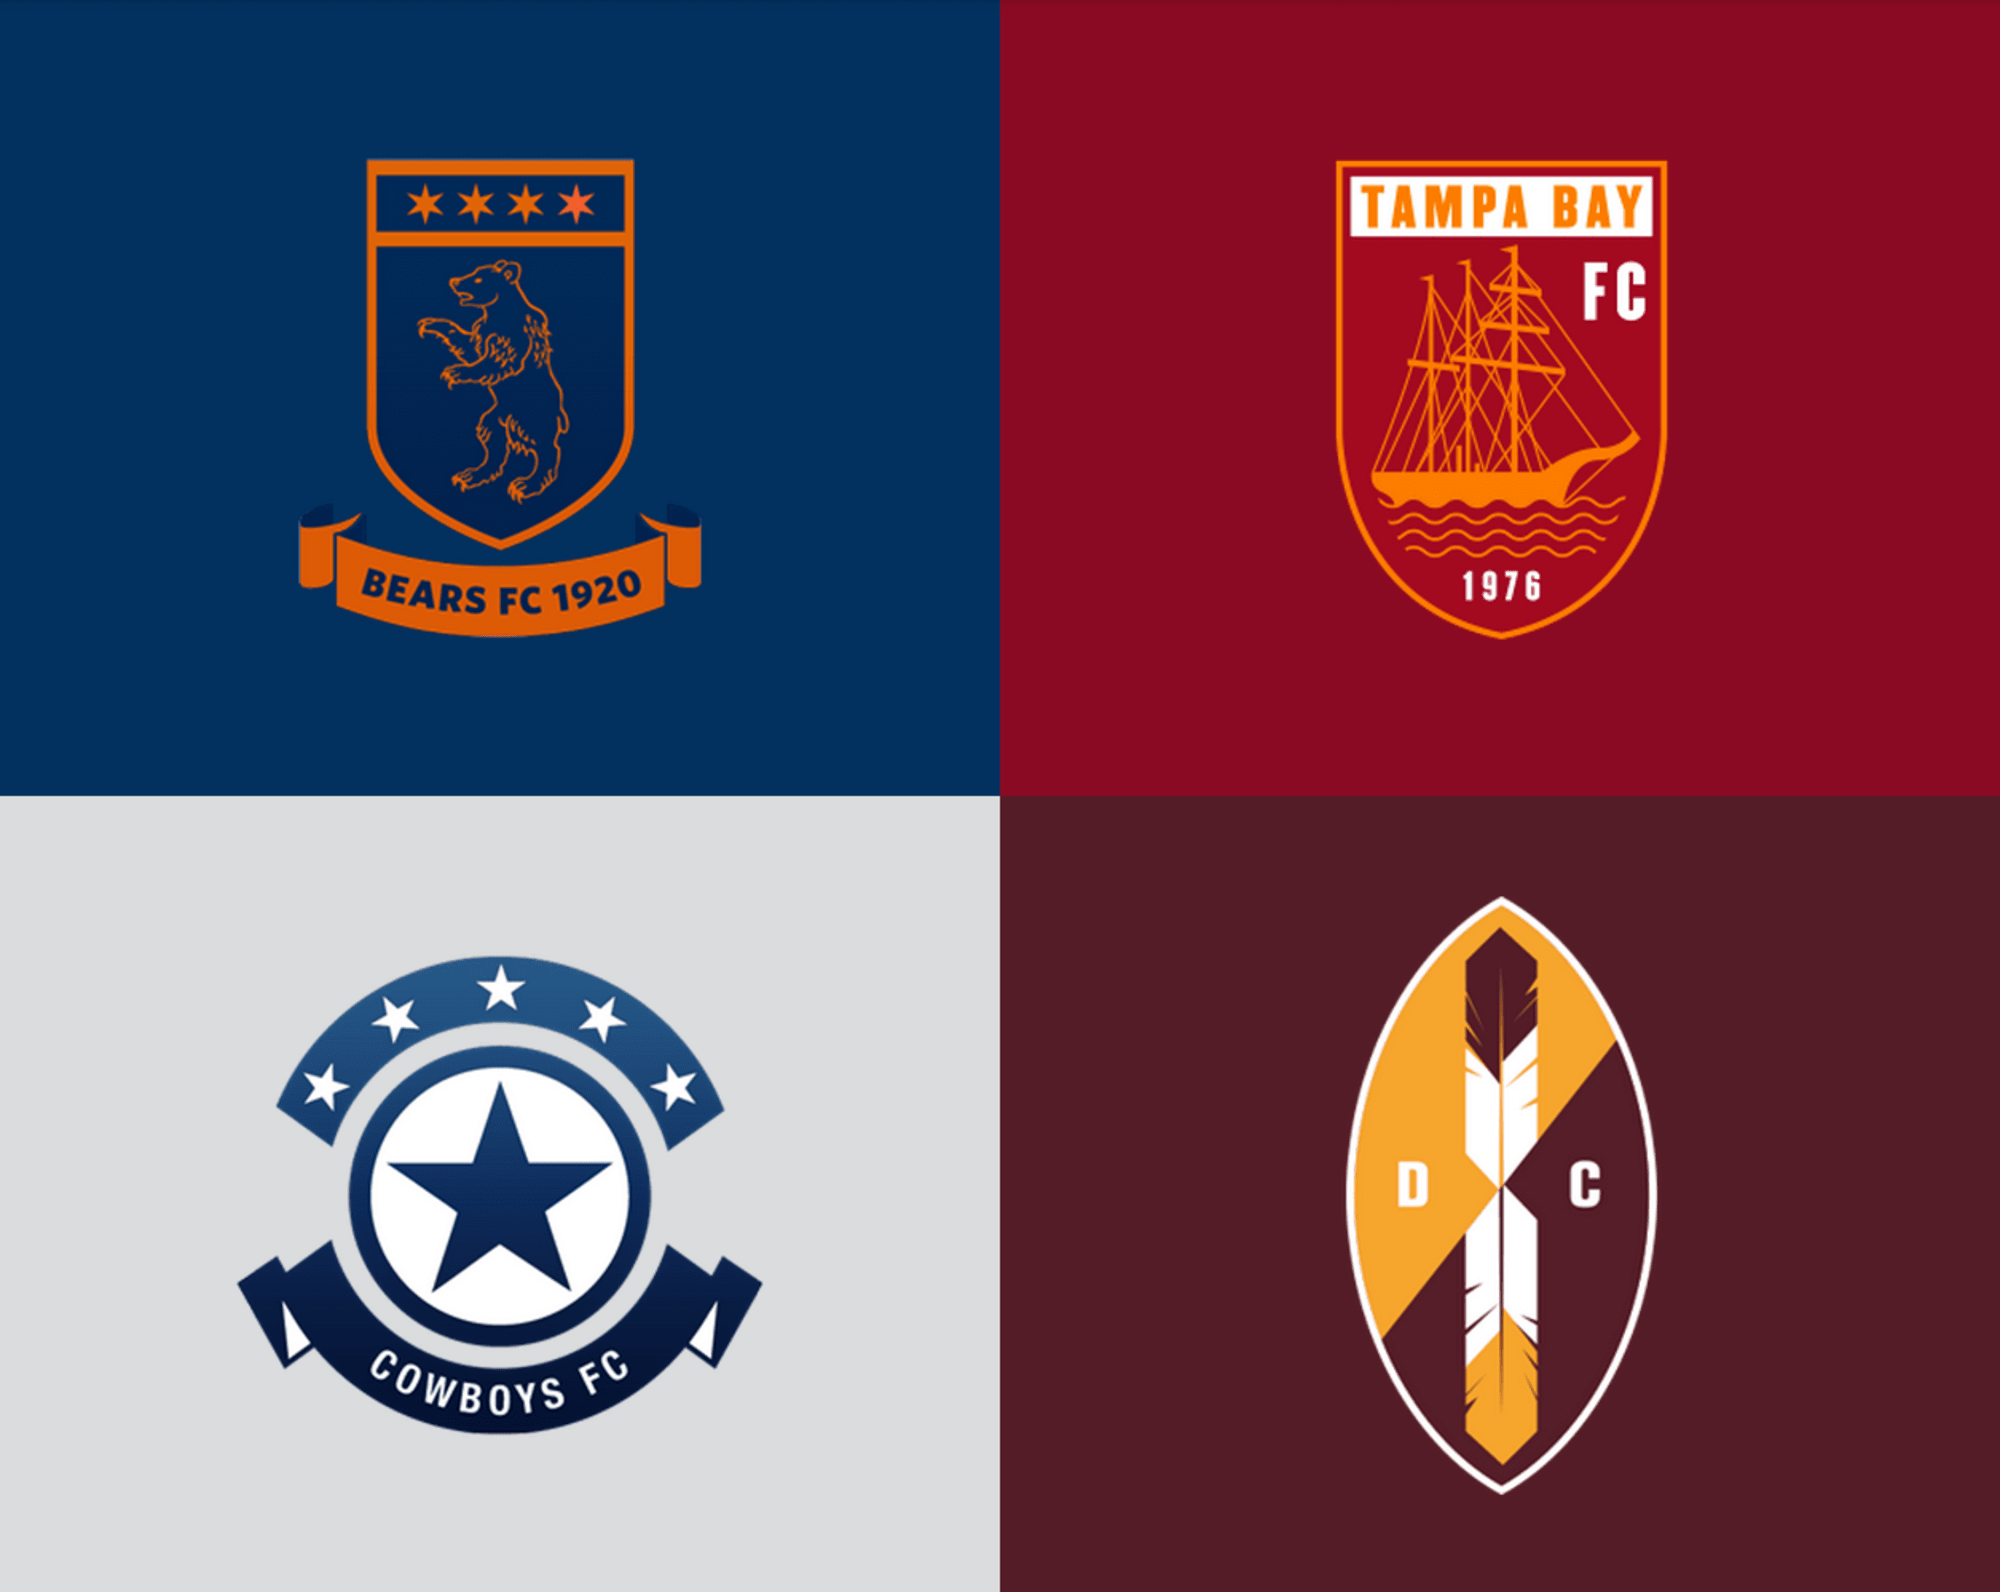 Nfl Logos Redesigned To Look Like Soccer Logos From Europe Photos